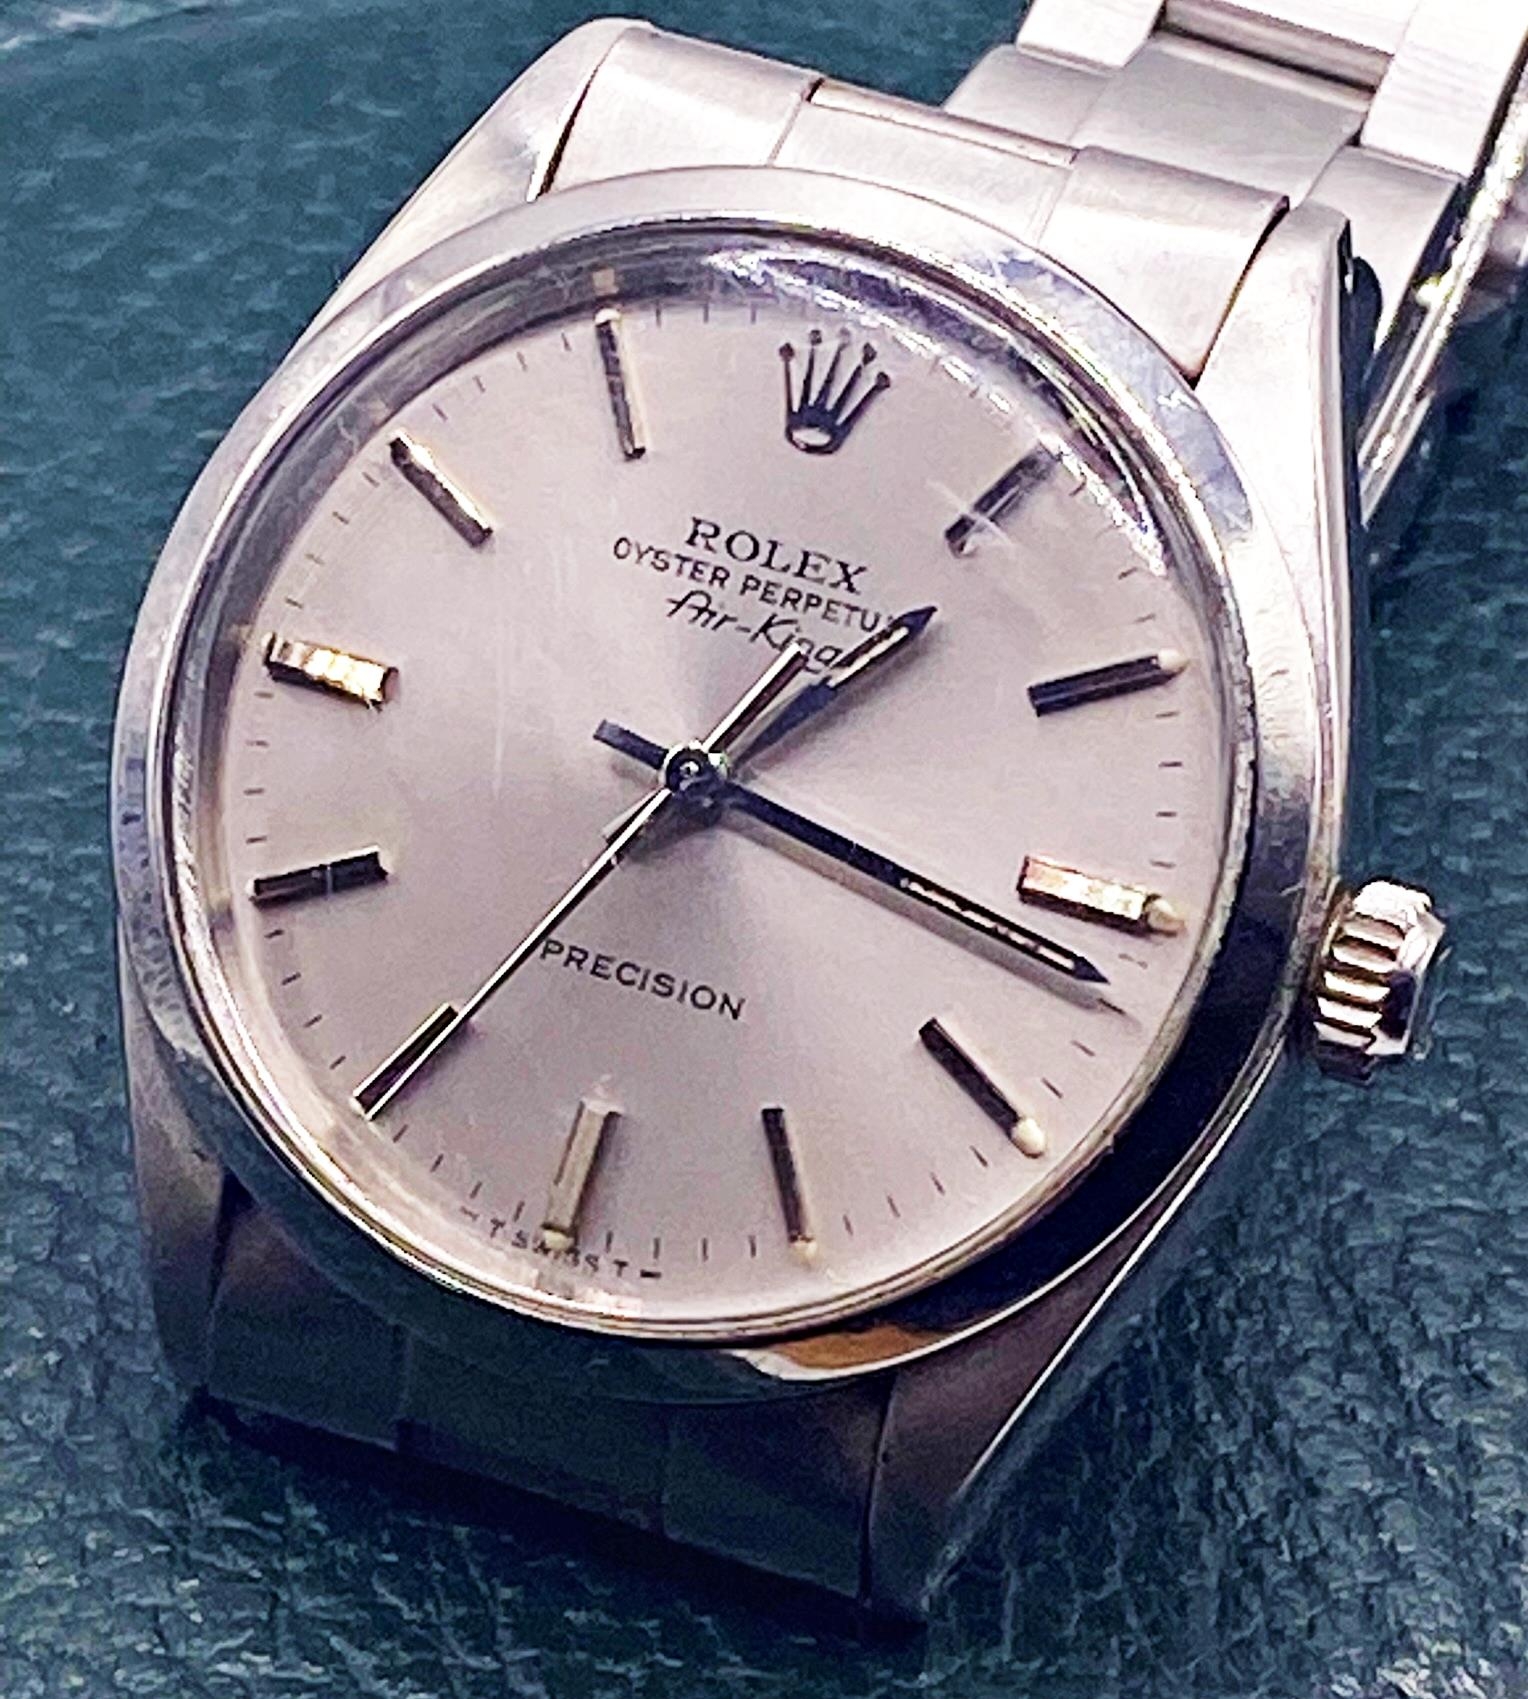 Gents Rolex Oster Perpetual Air King Precision stainless steel Wrist Watch, 34mm case, steel - Image 3 of 5